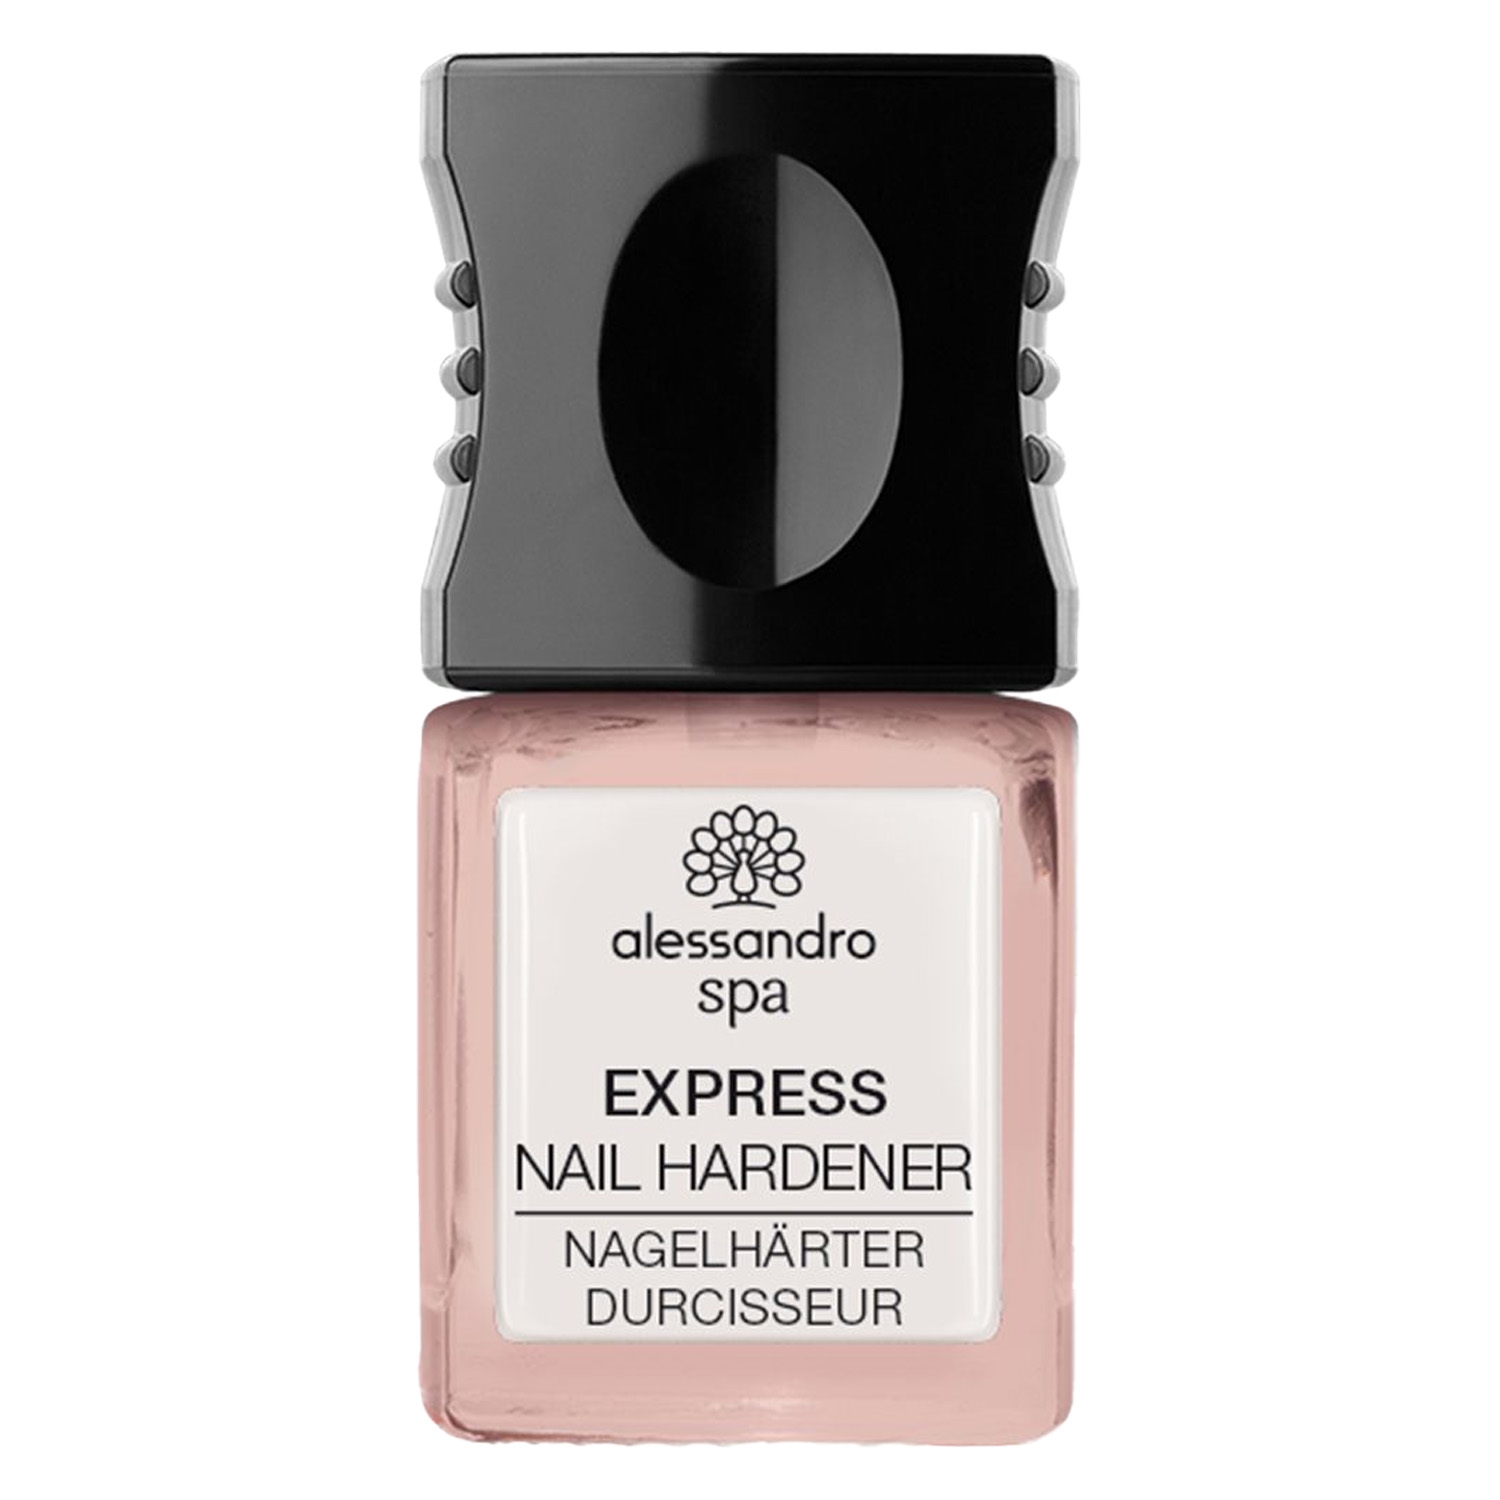 Product image from Alessandro Spa - Express Nail Hardener Nude